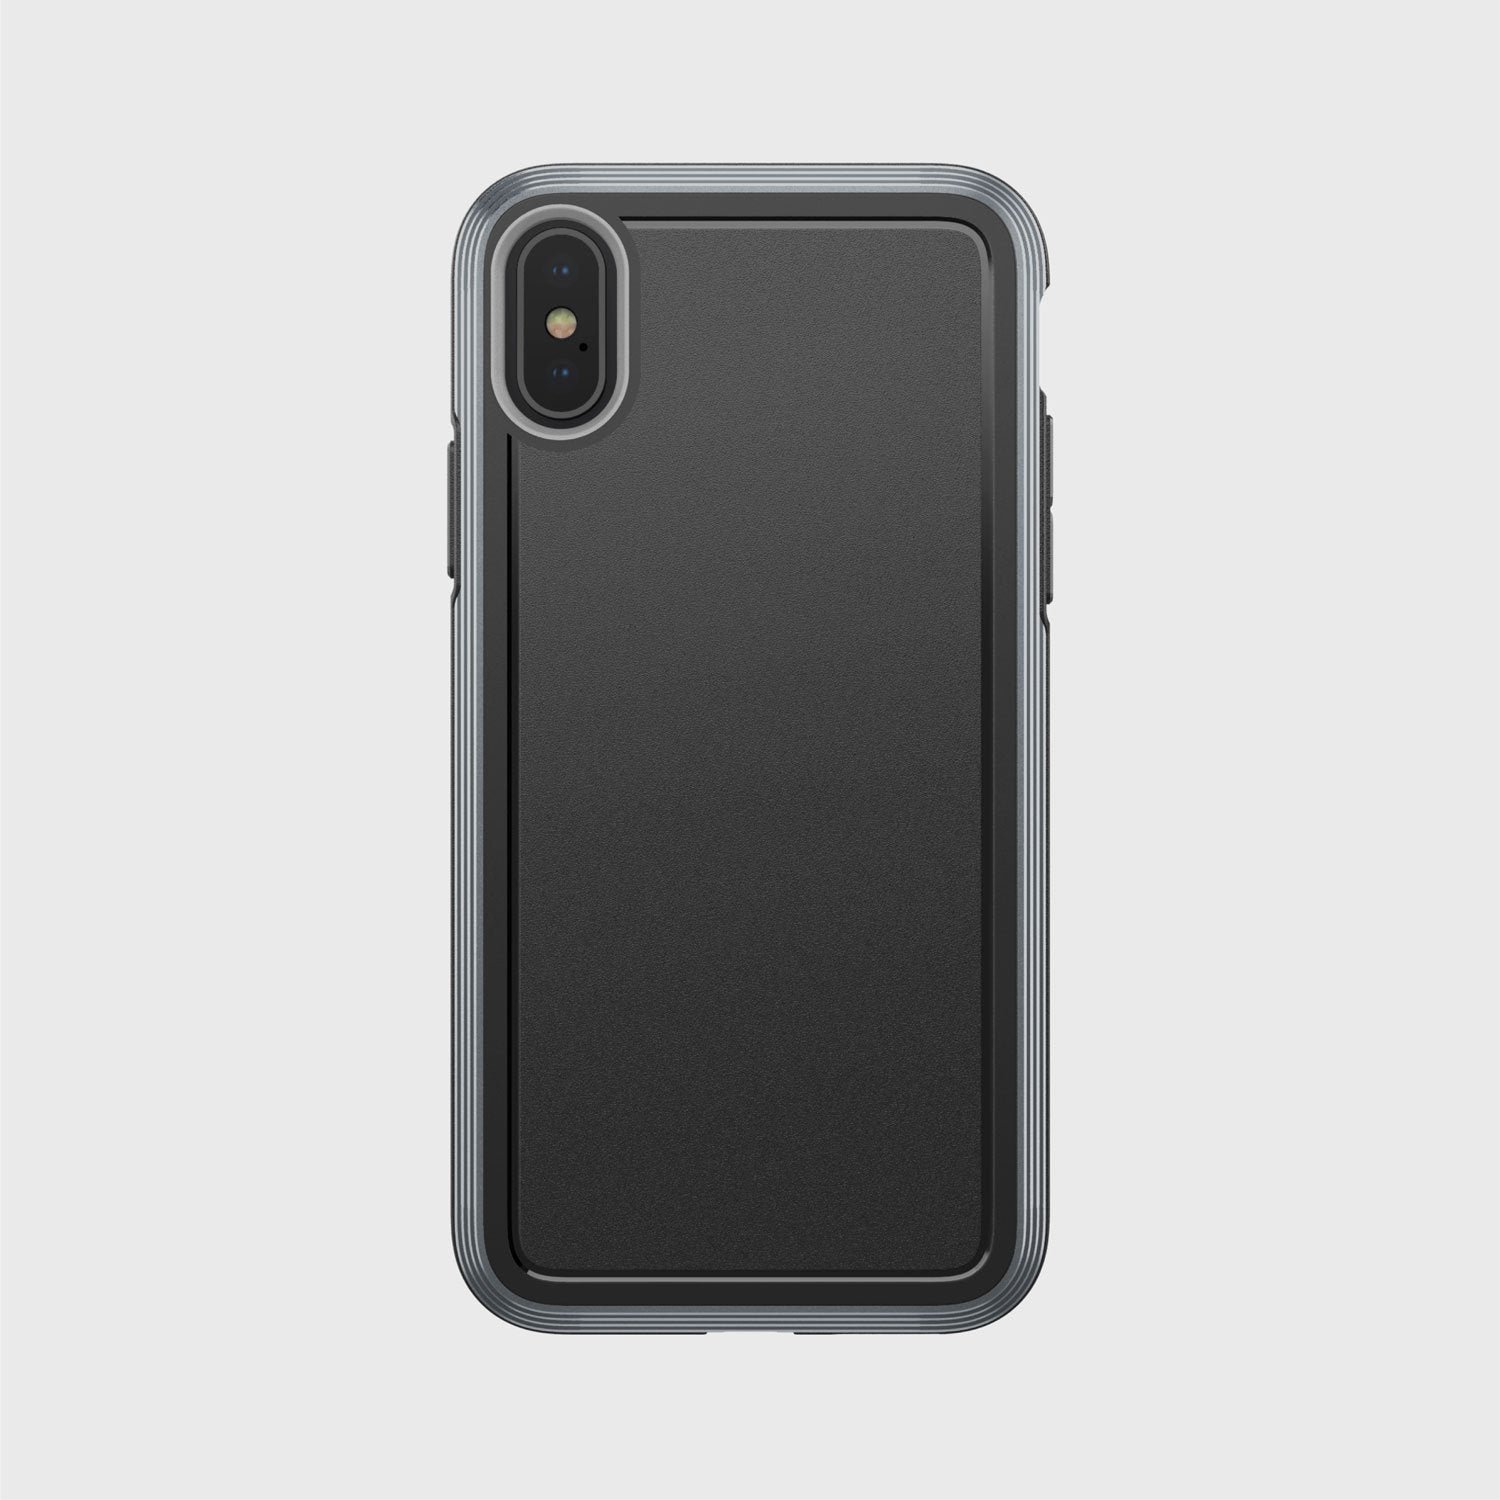 An iPhone Xs Defense Ultra Black case by X-Doria that provides device protection and meets the MIL-STD-810G Standard.